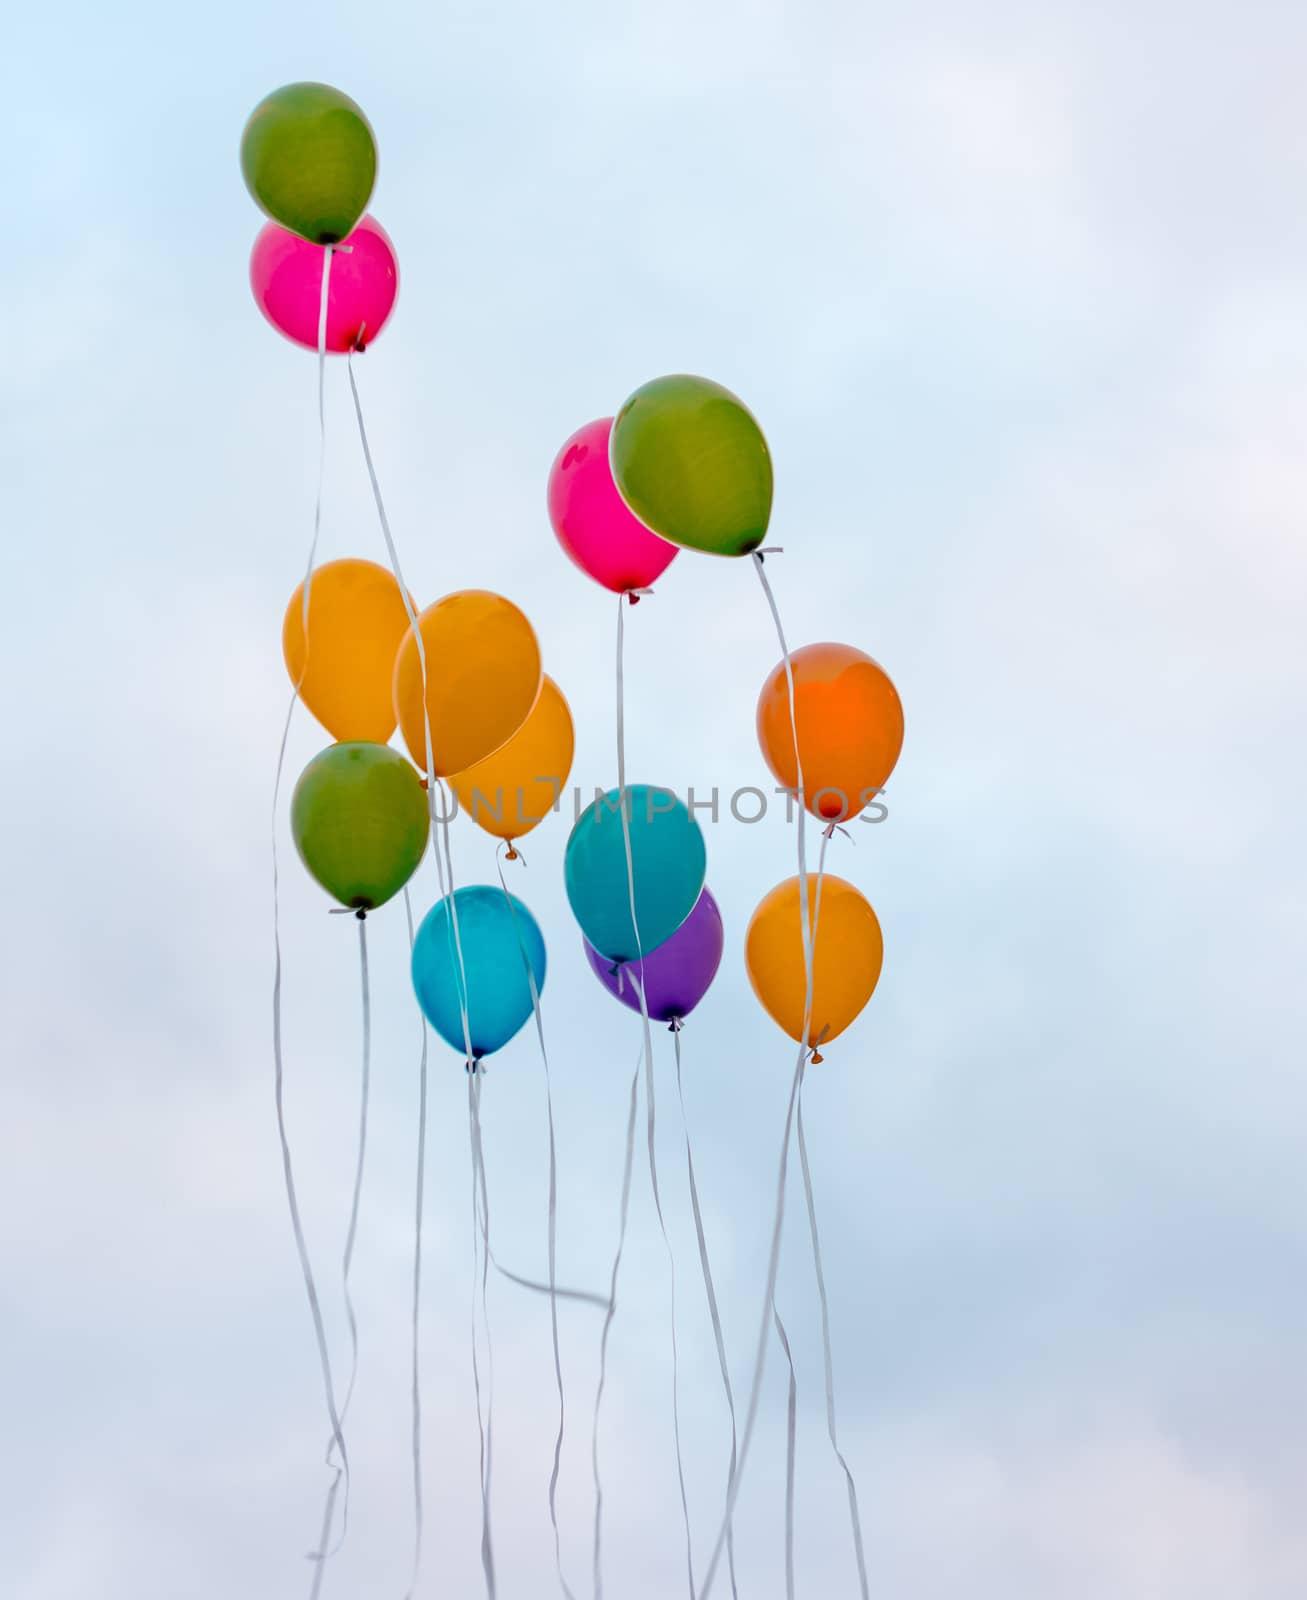 Colourful balloons flying in the sky.